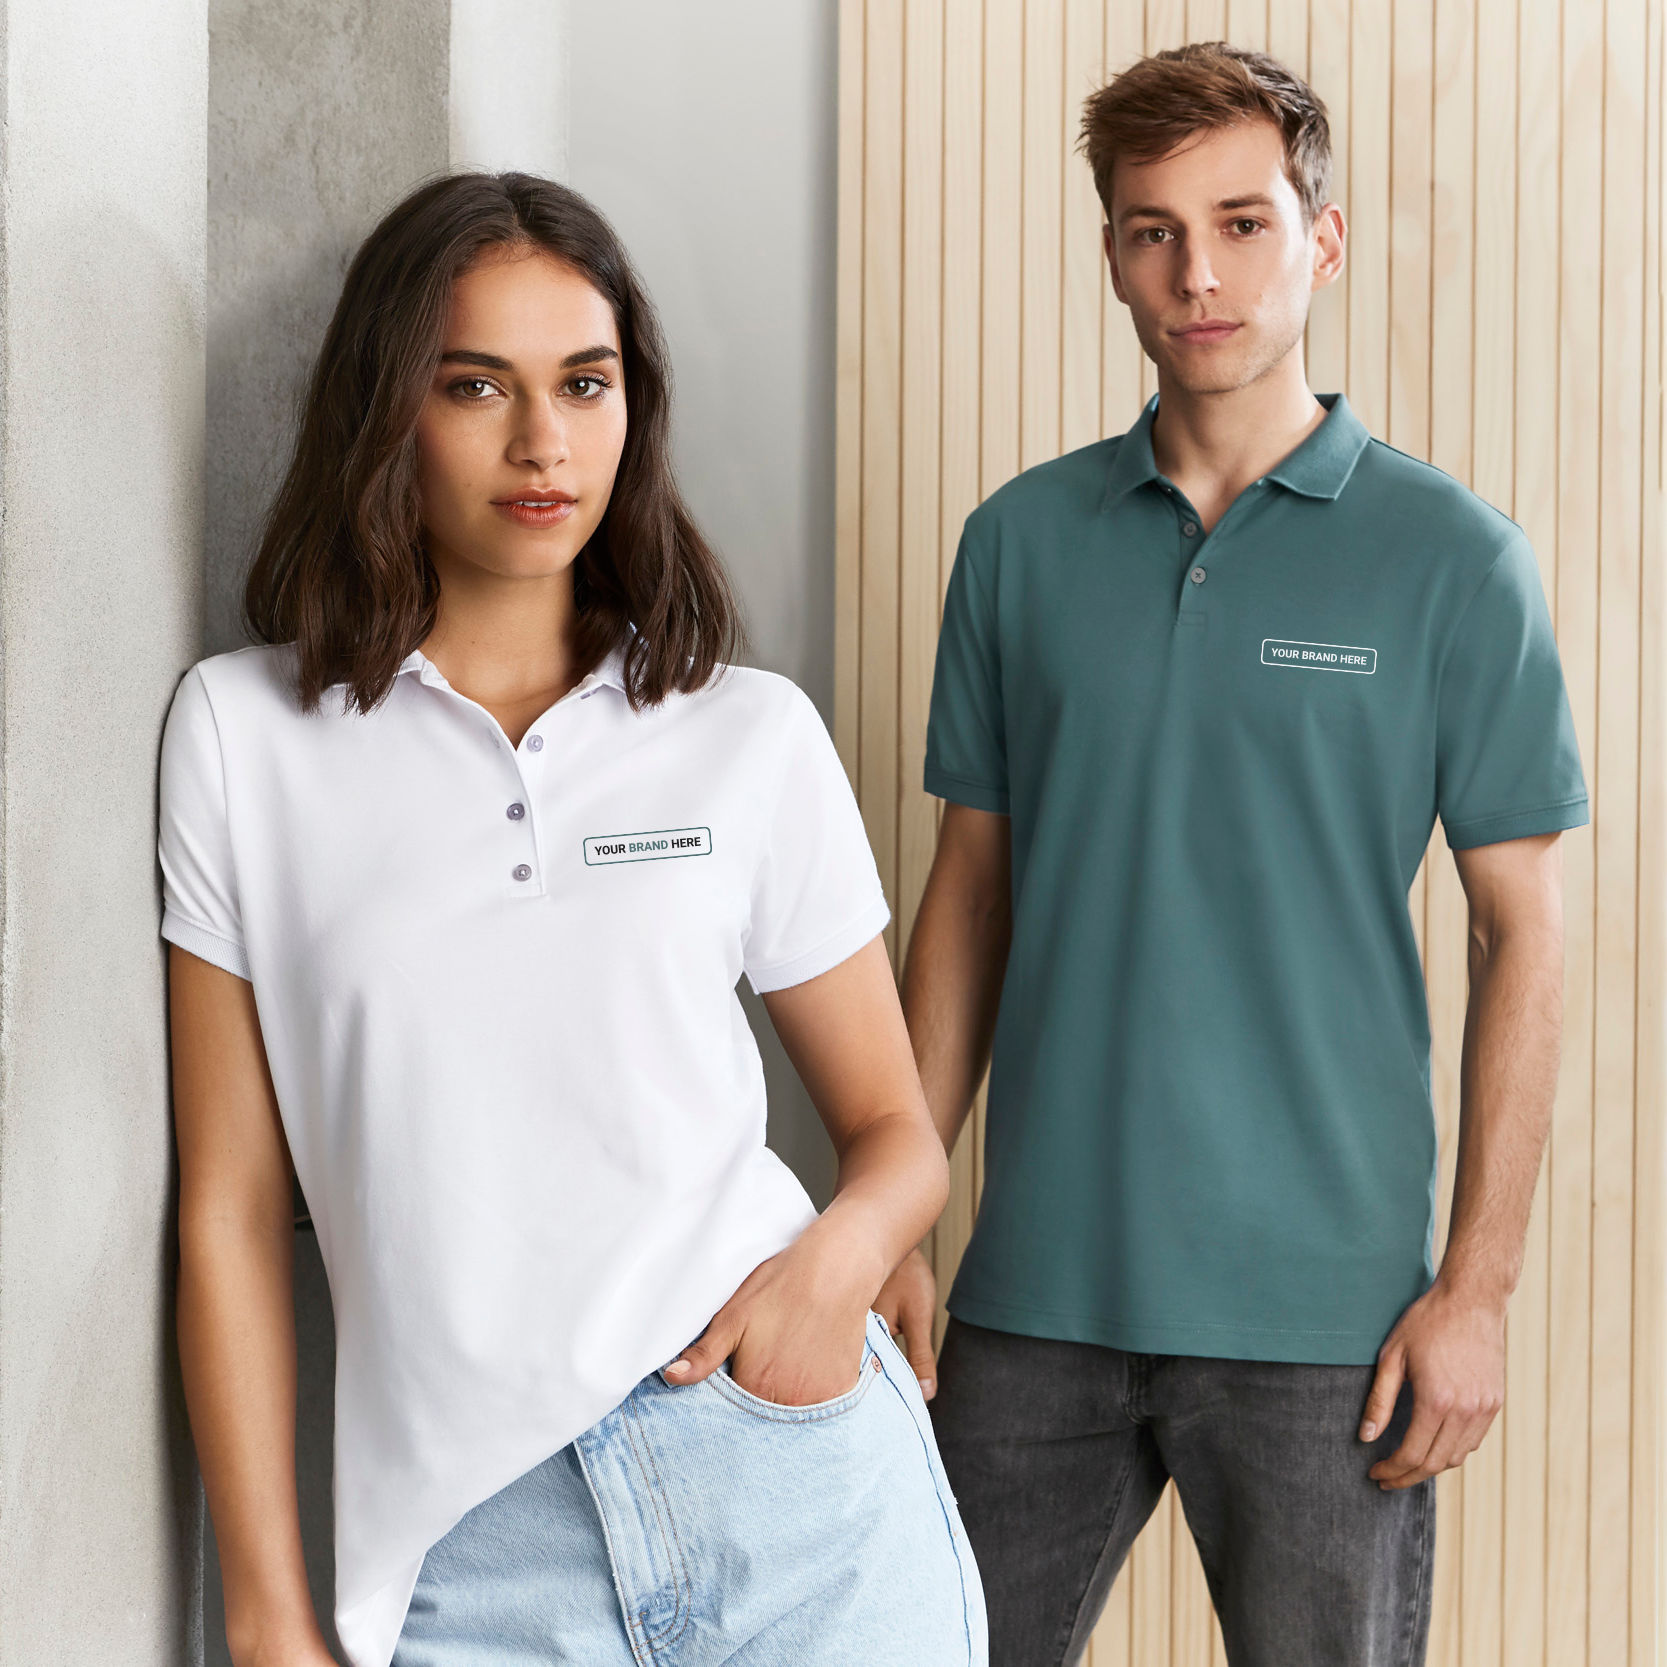 4 simple questions to ask when choosing your polo shirt uniforms